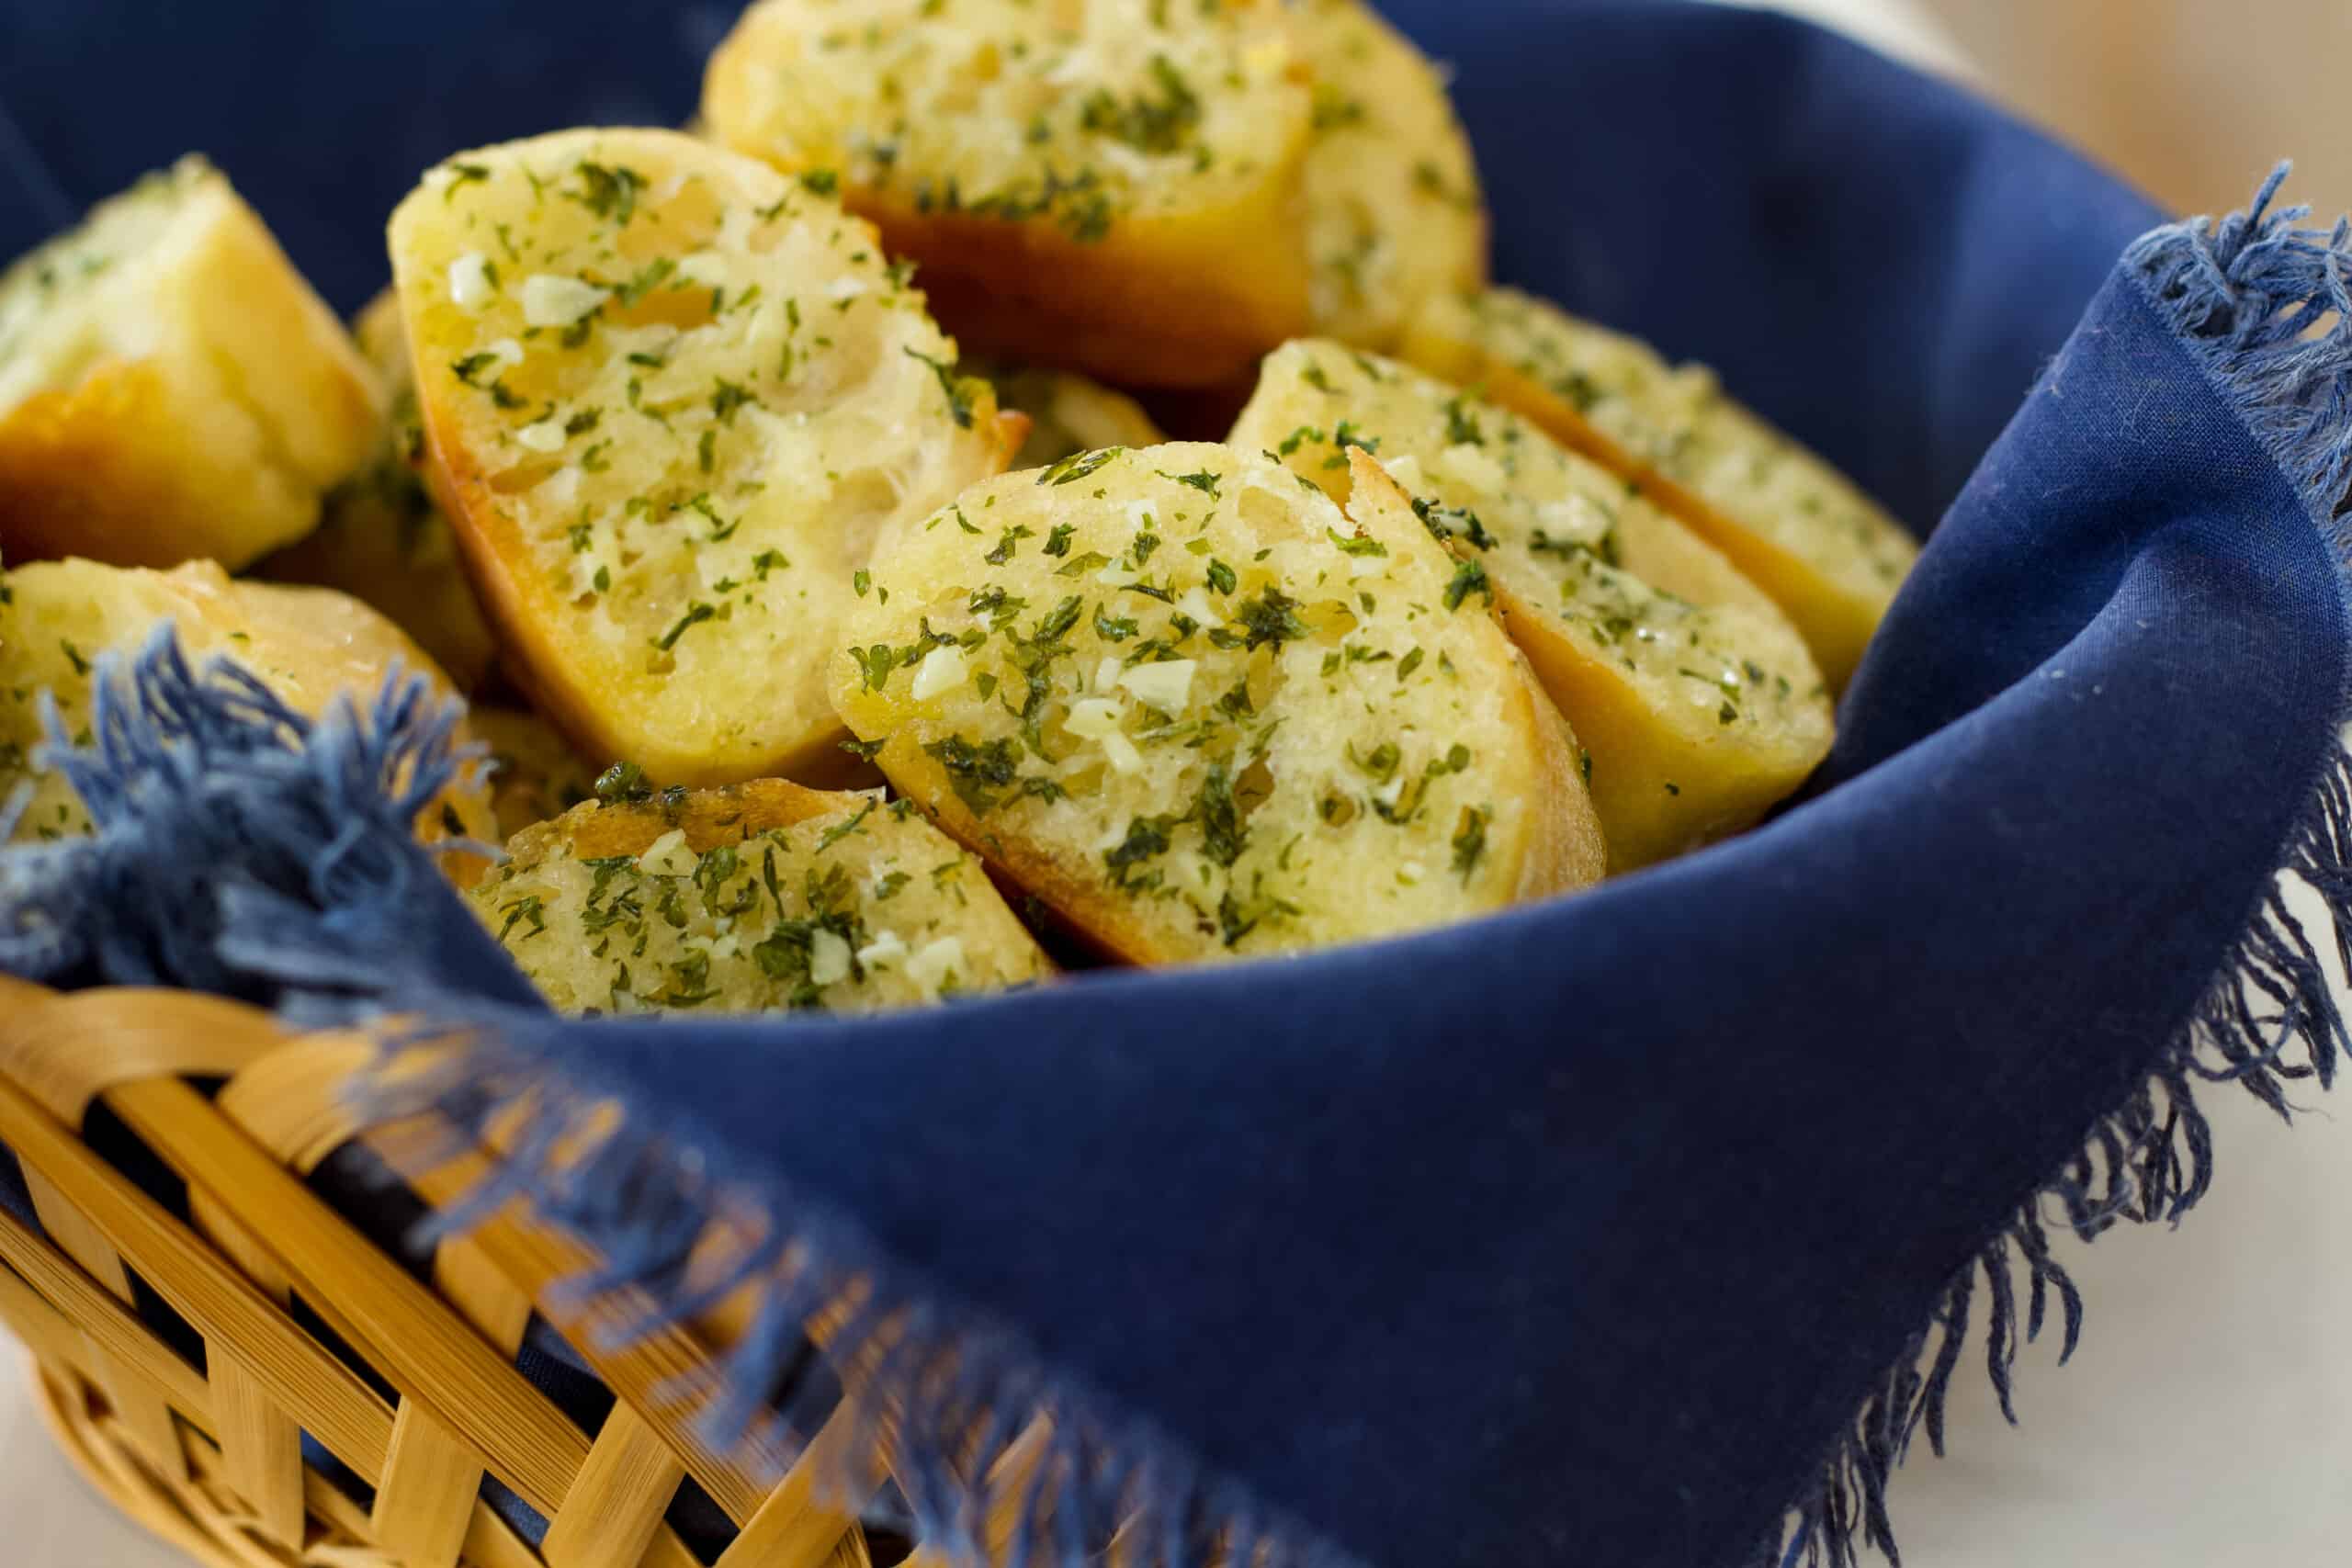 Side view of a basket lined with a dark blue napkin filled with slices of garlic bread.